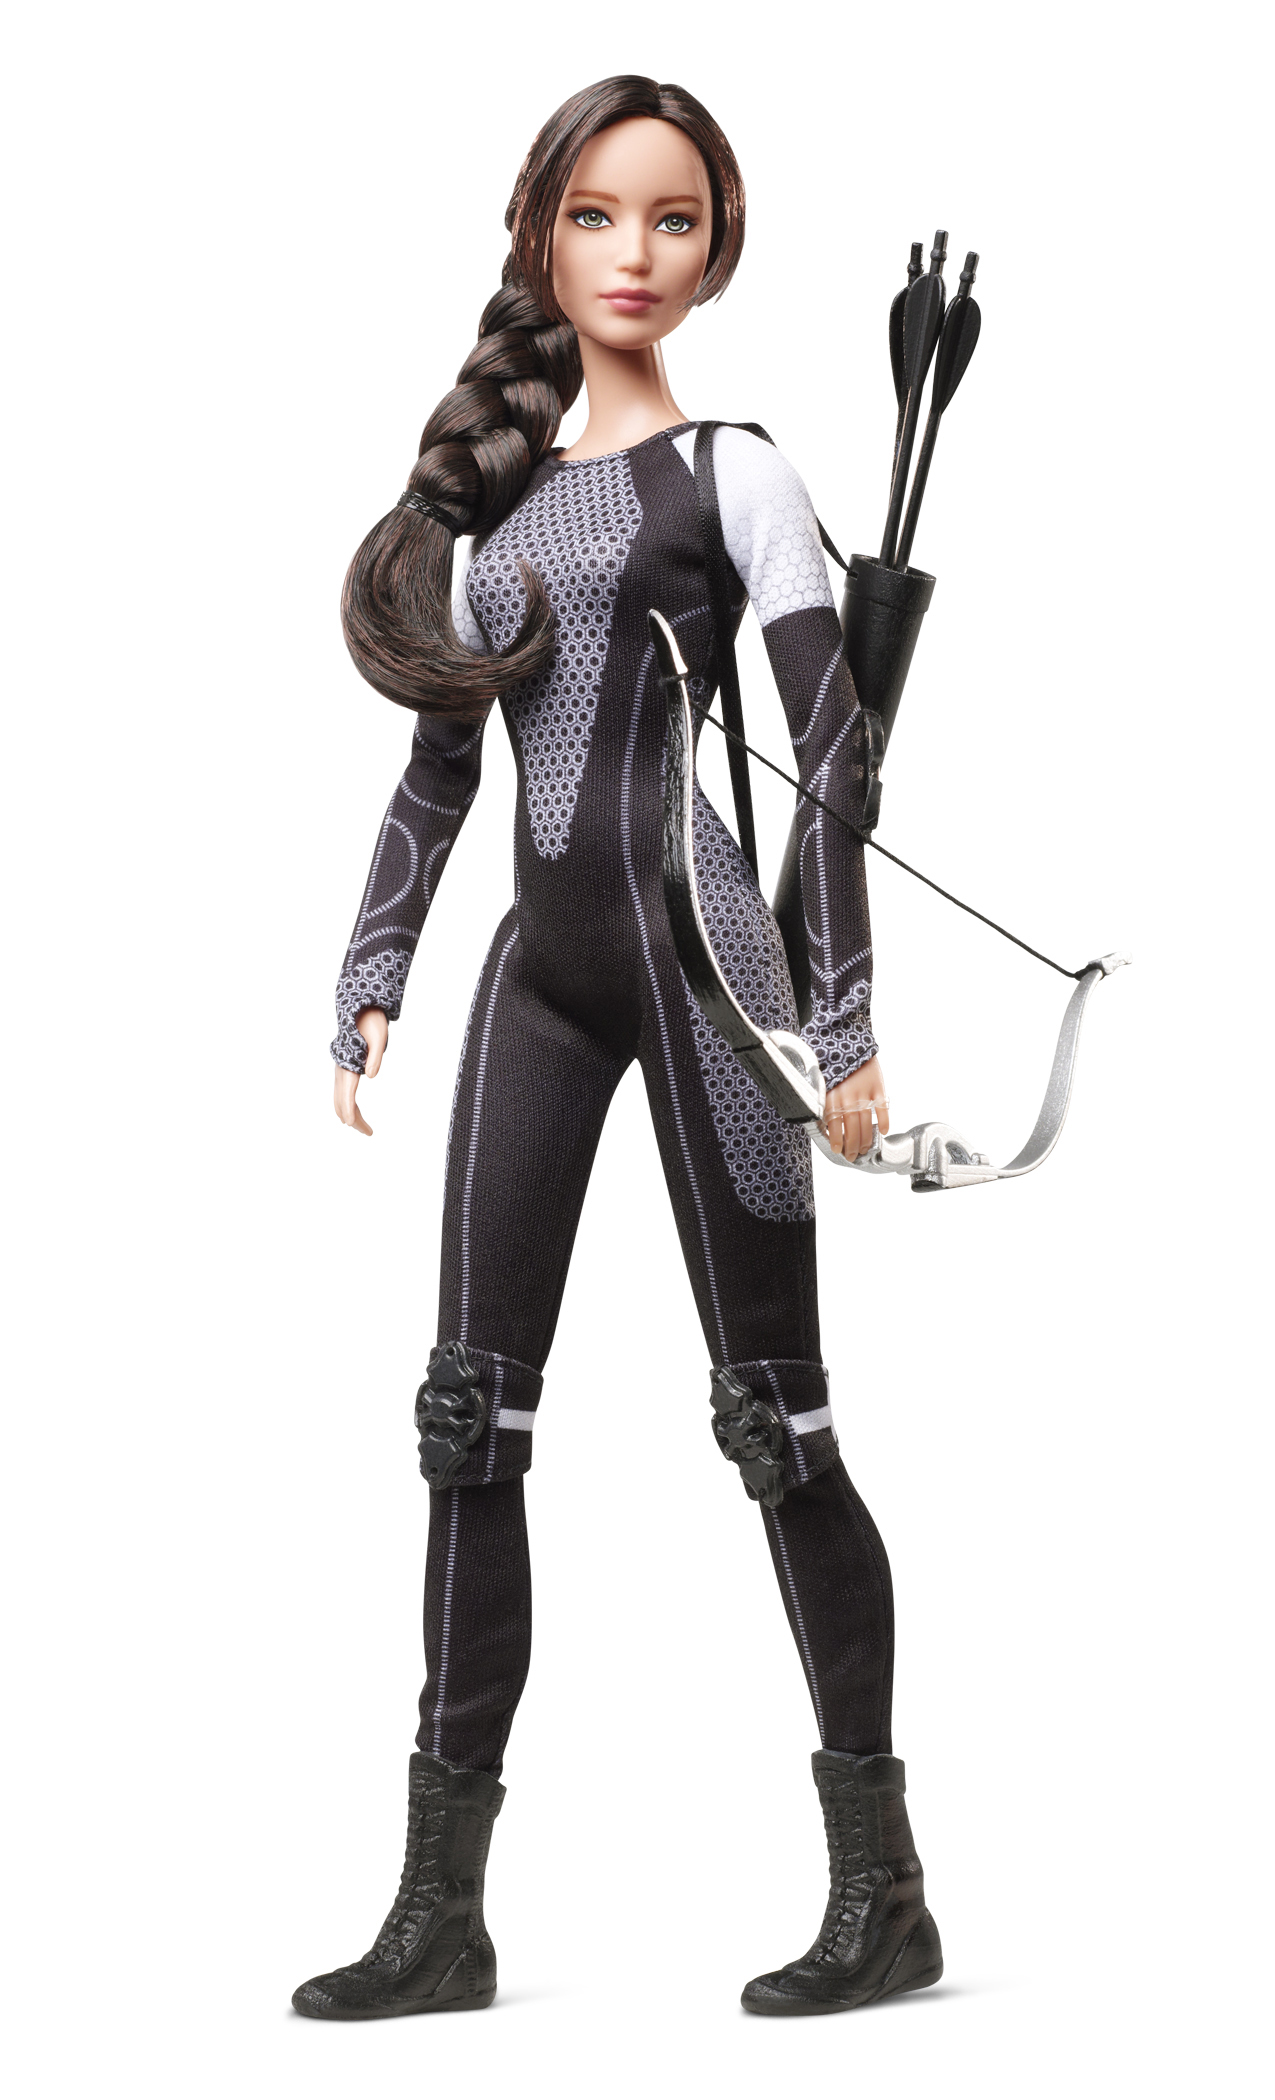 "The Hunger Games: Catching Fire" Katniss Barbie, released in 2013.